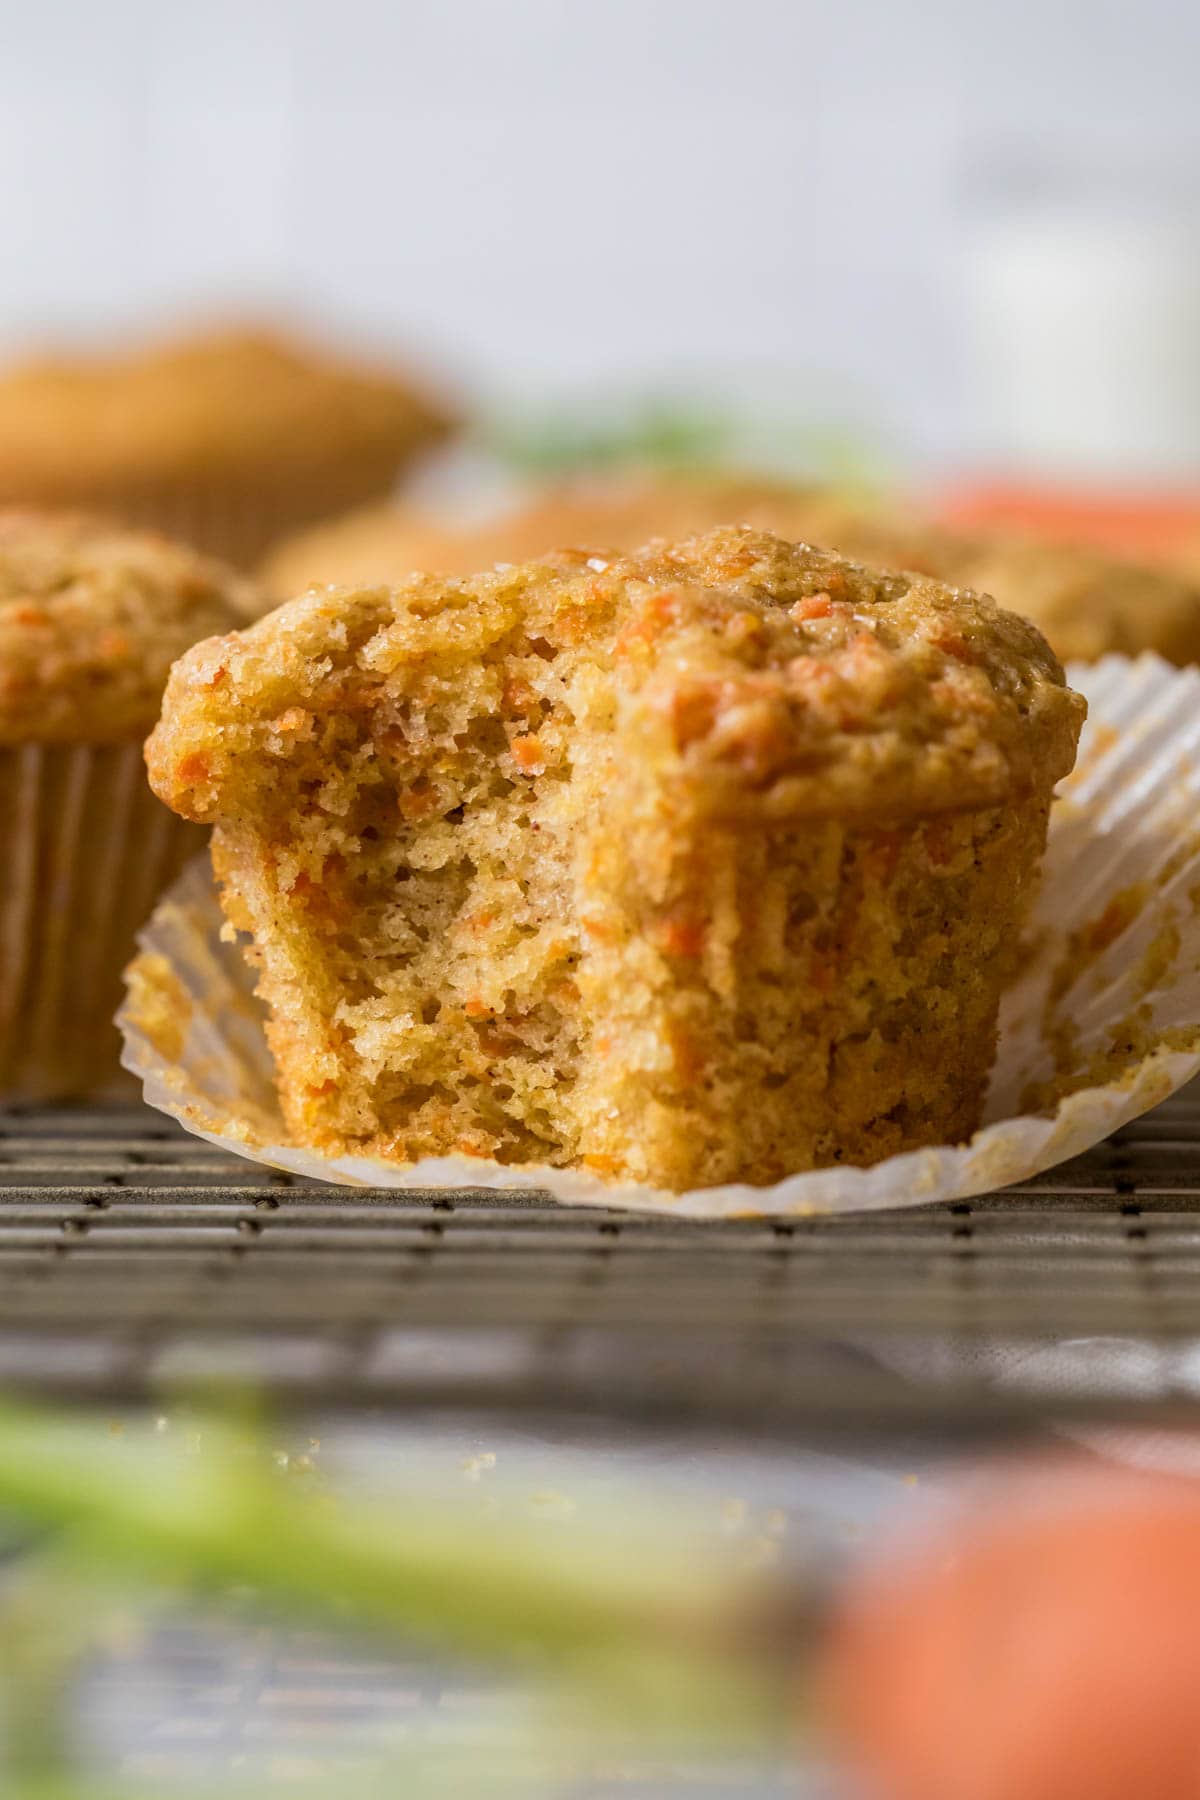 Close-up view of a muffin made with carrots that's been unwrapped and bitten.